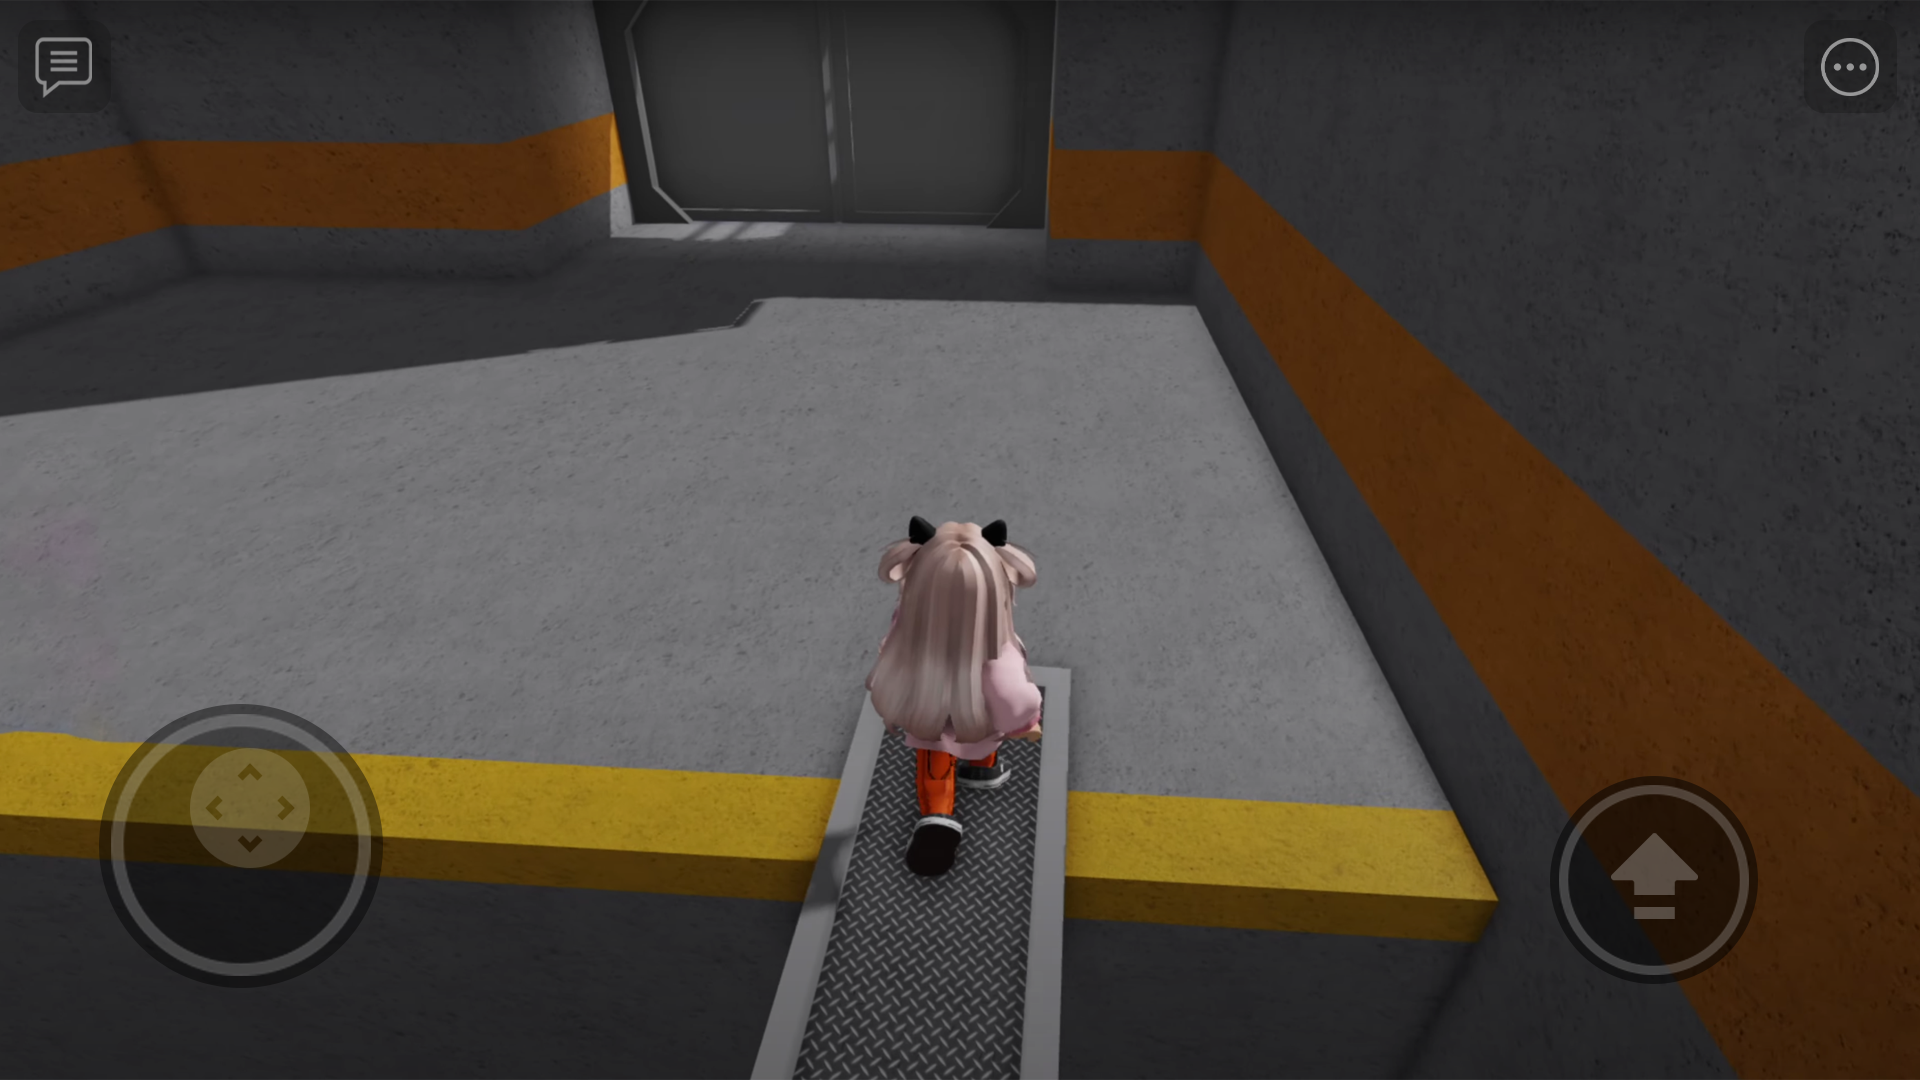 Scp 3008 – Scary shopping Mall APK for Android Download